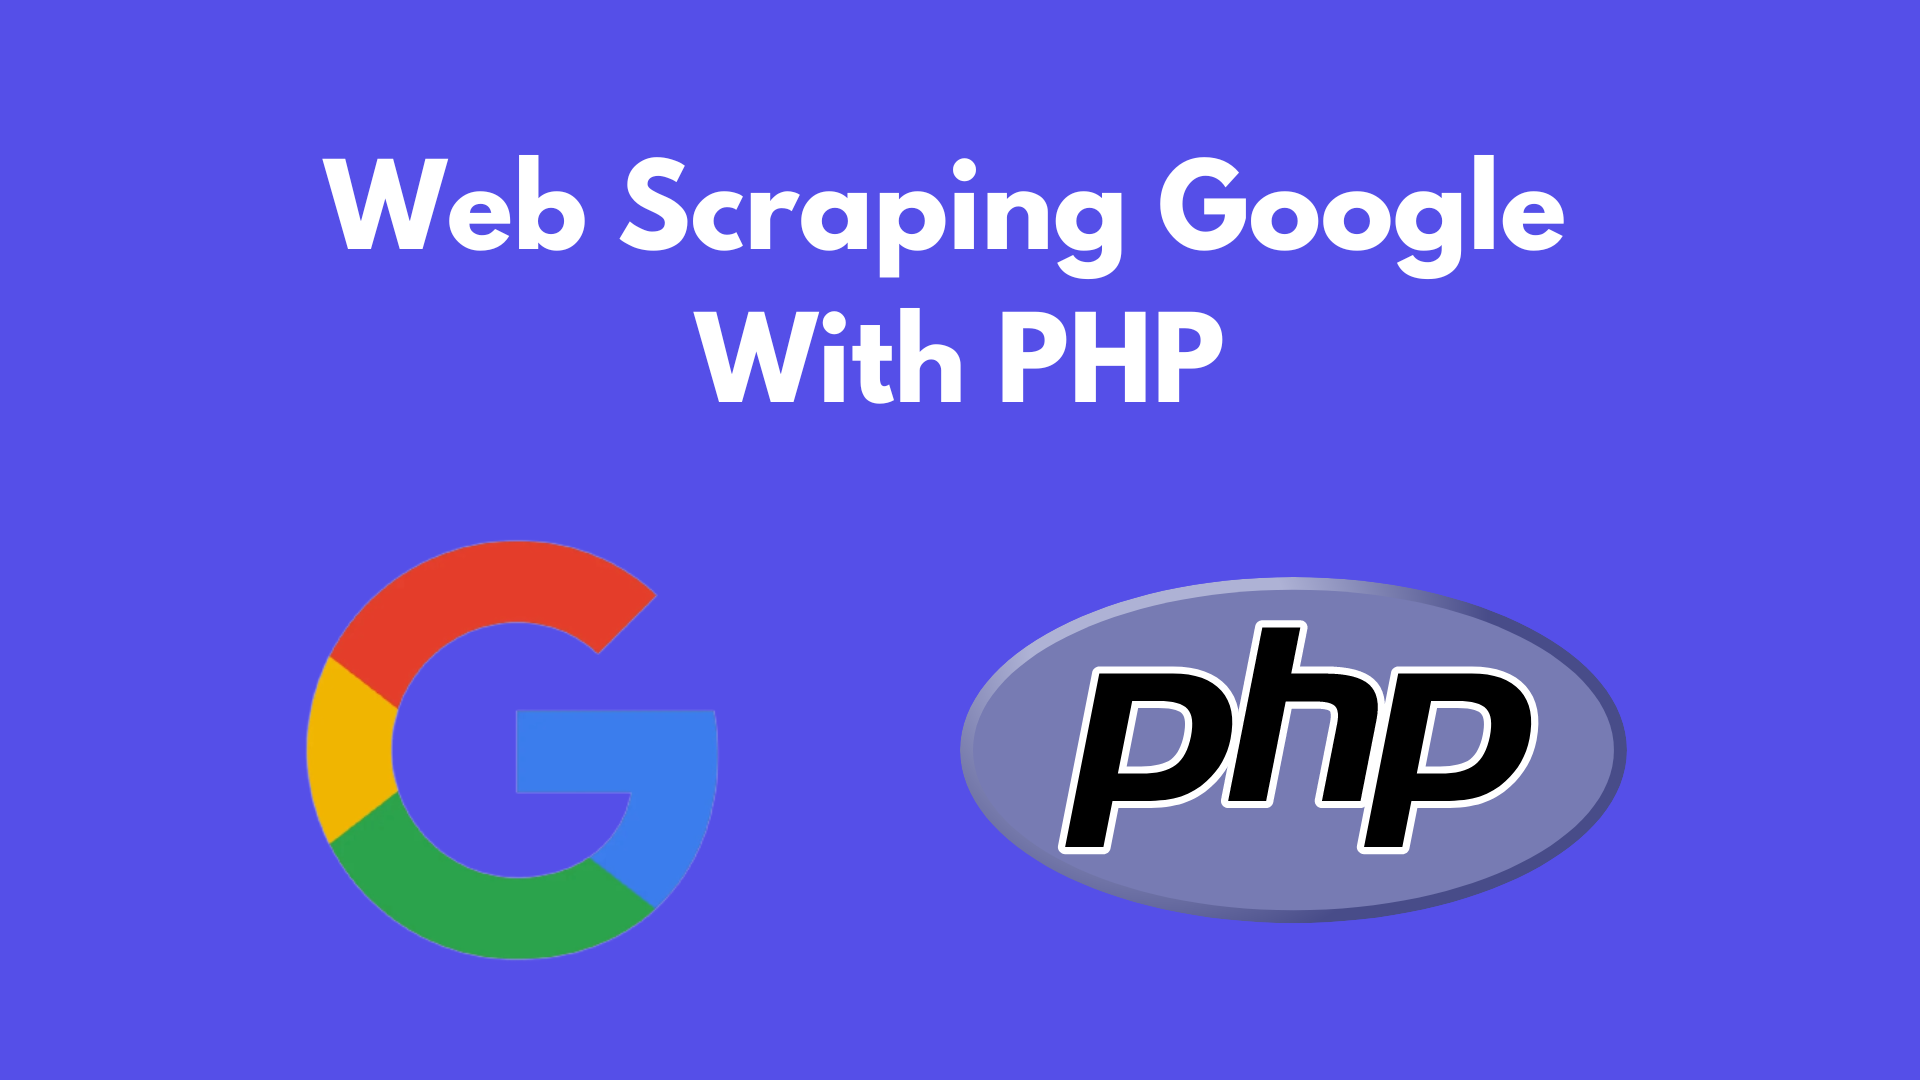 Scrape Google Search Results Using PHP